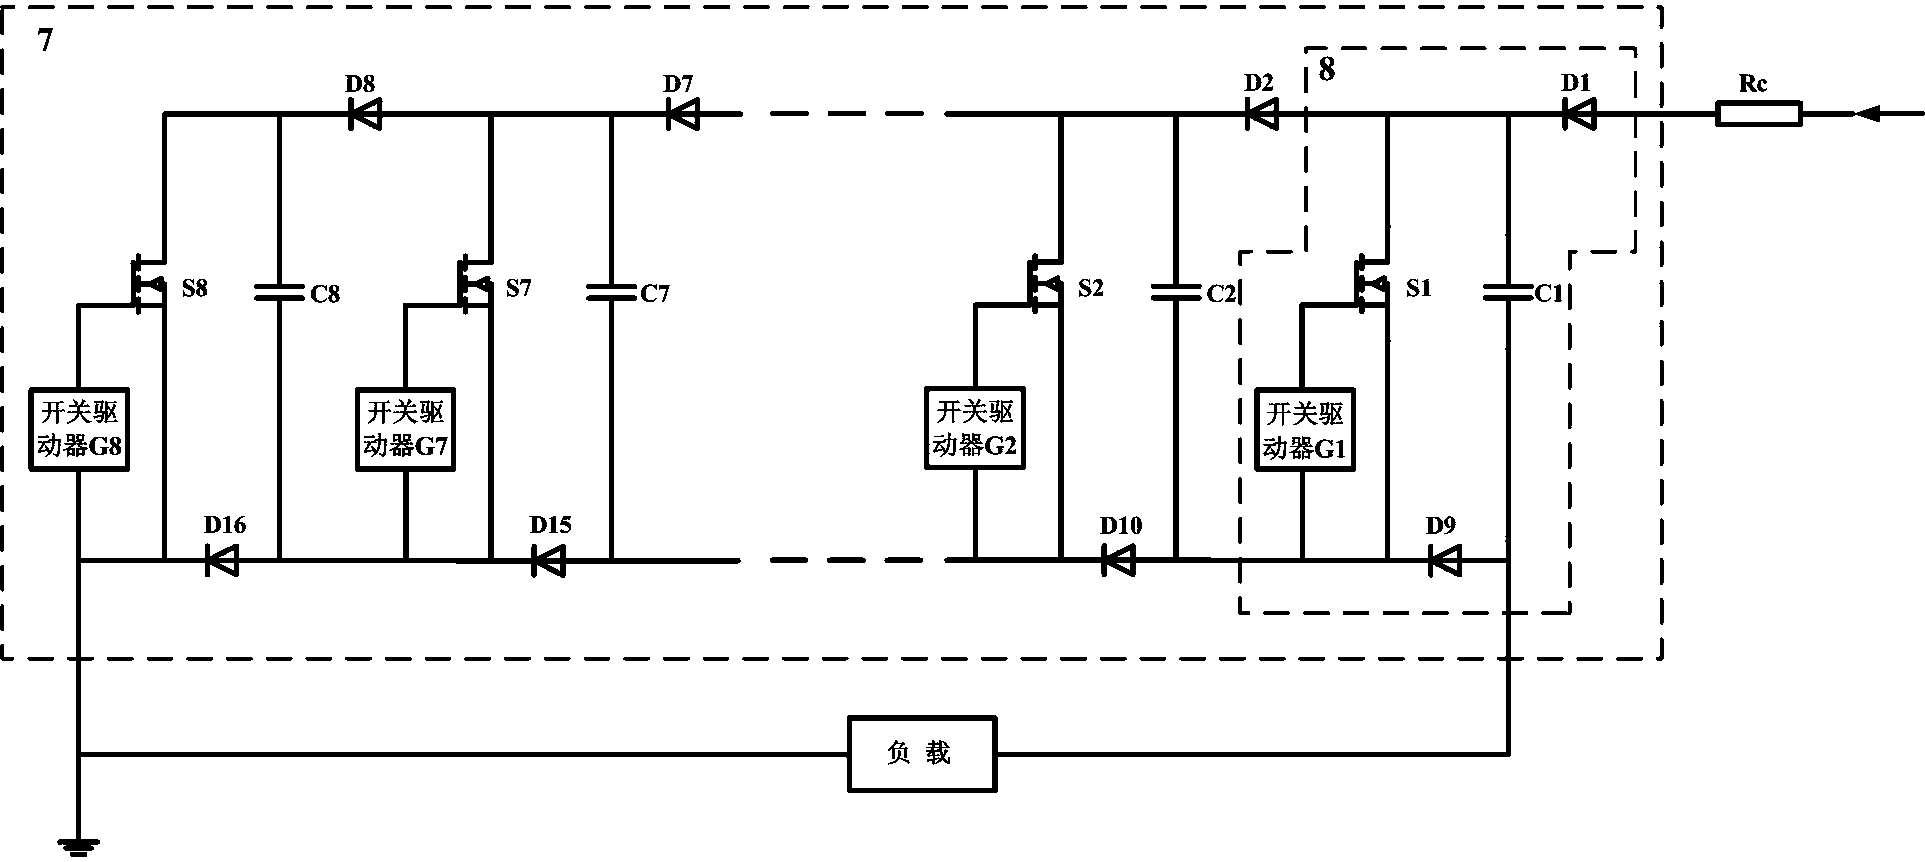 FPGA (field programmable gate array) control-based all-solid-state high-voltage nanosecond pulse generator